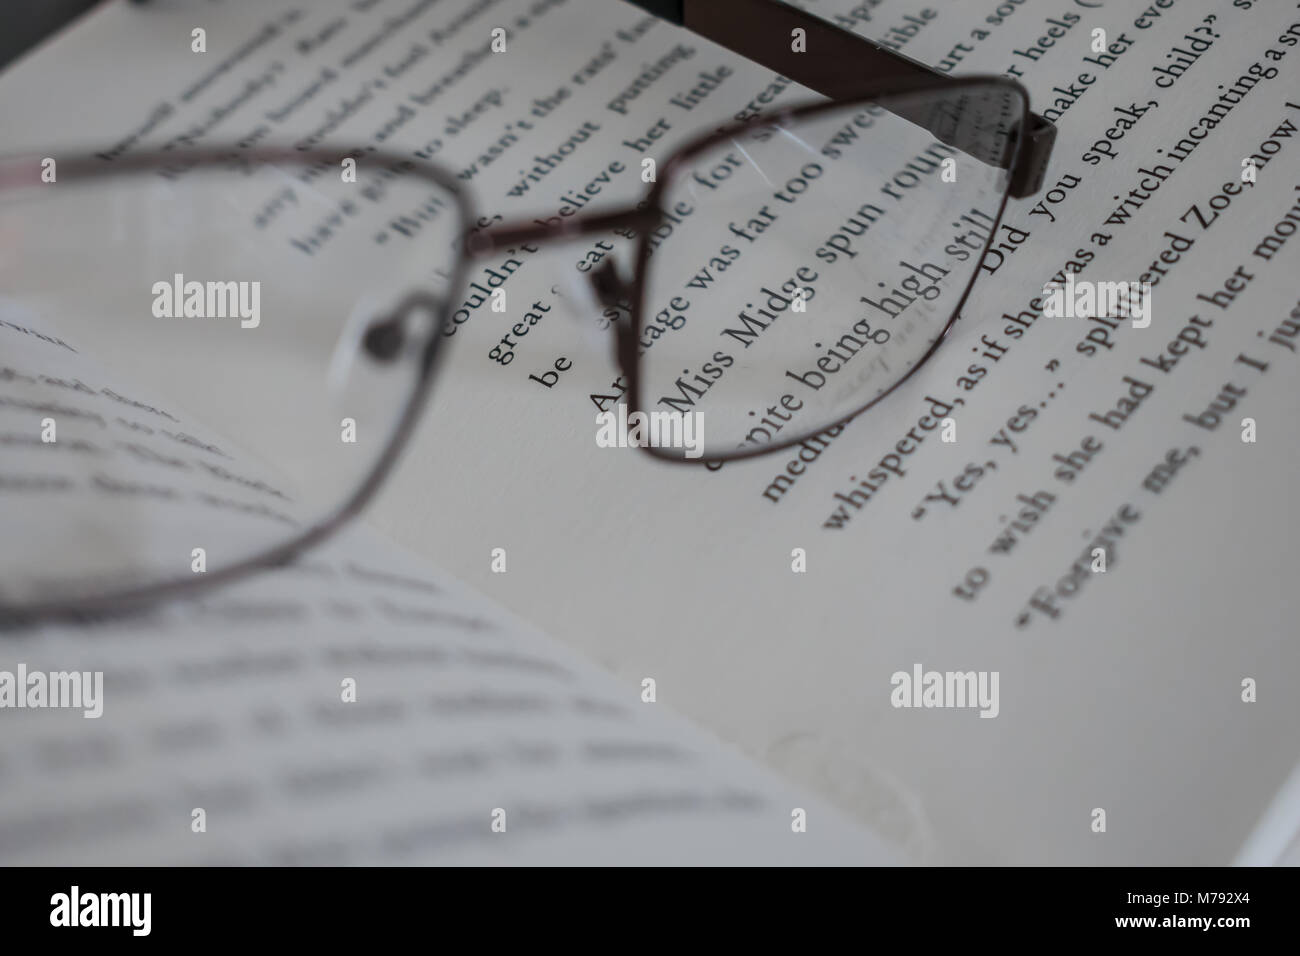 book with glasses on Stock Photo